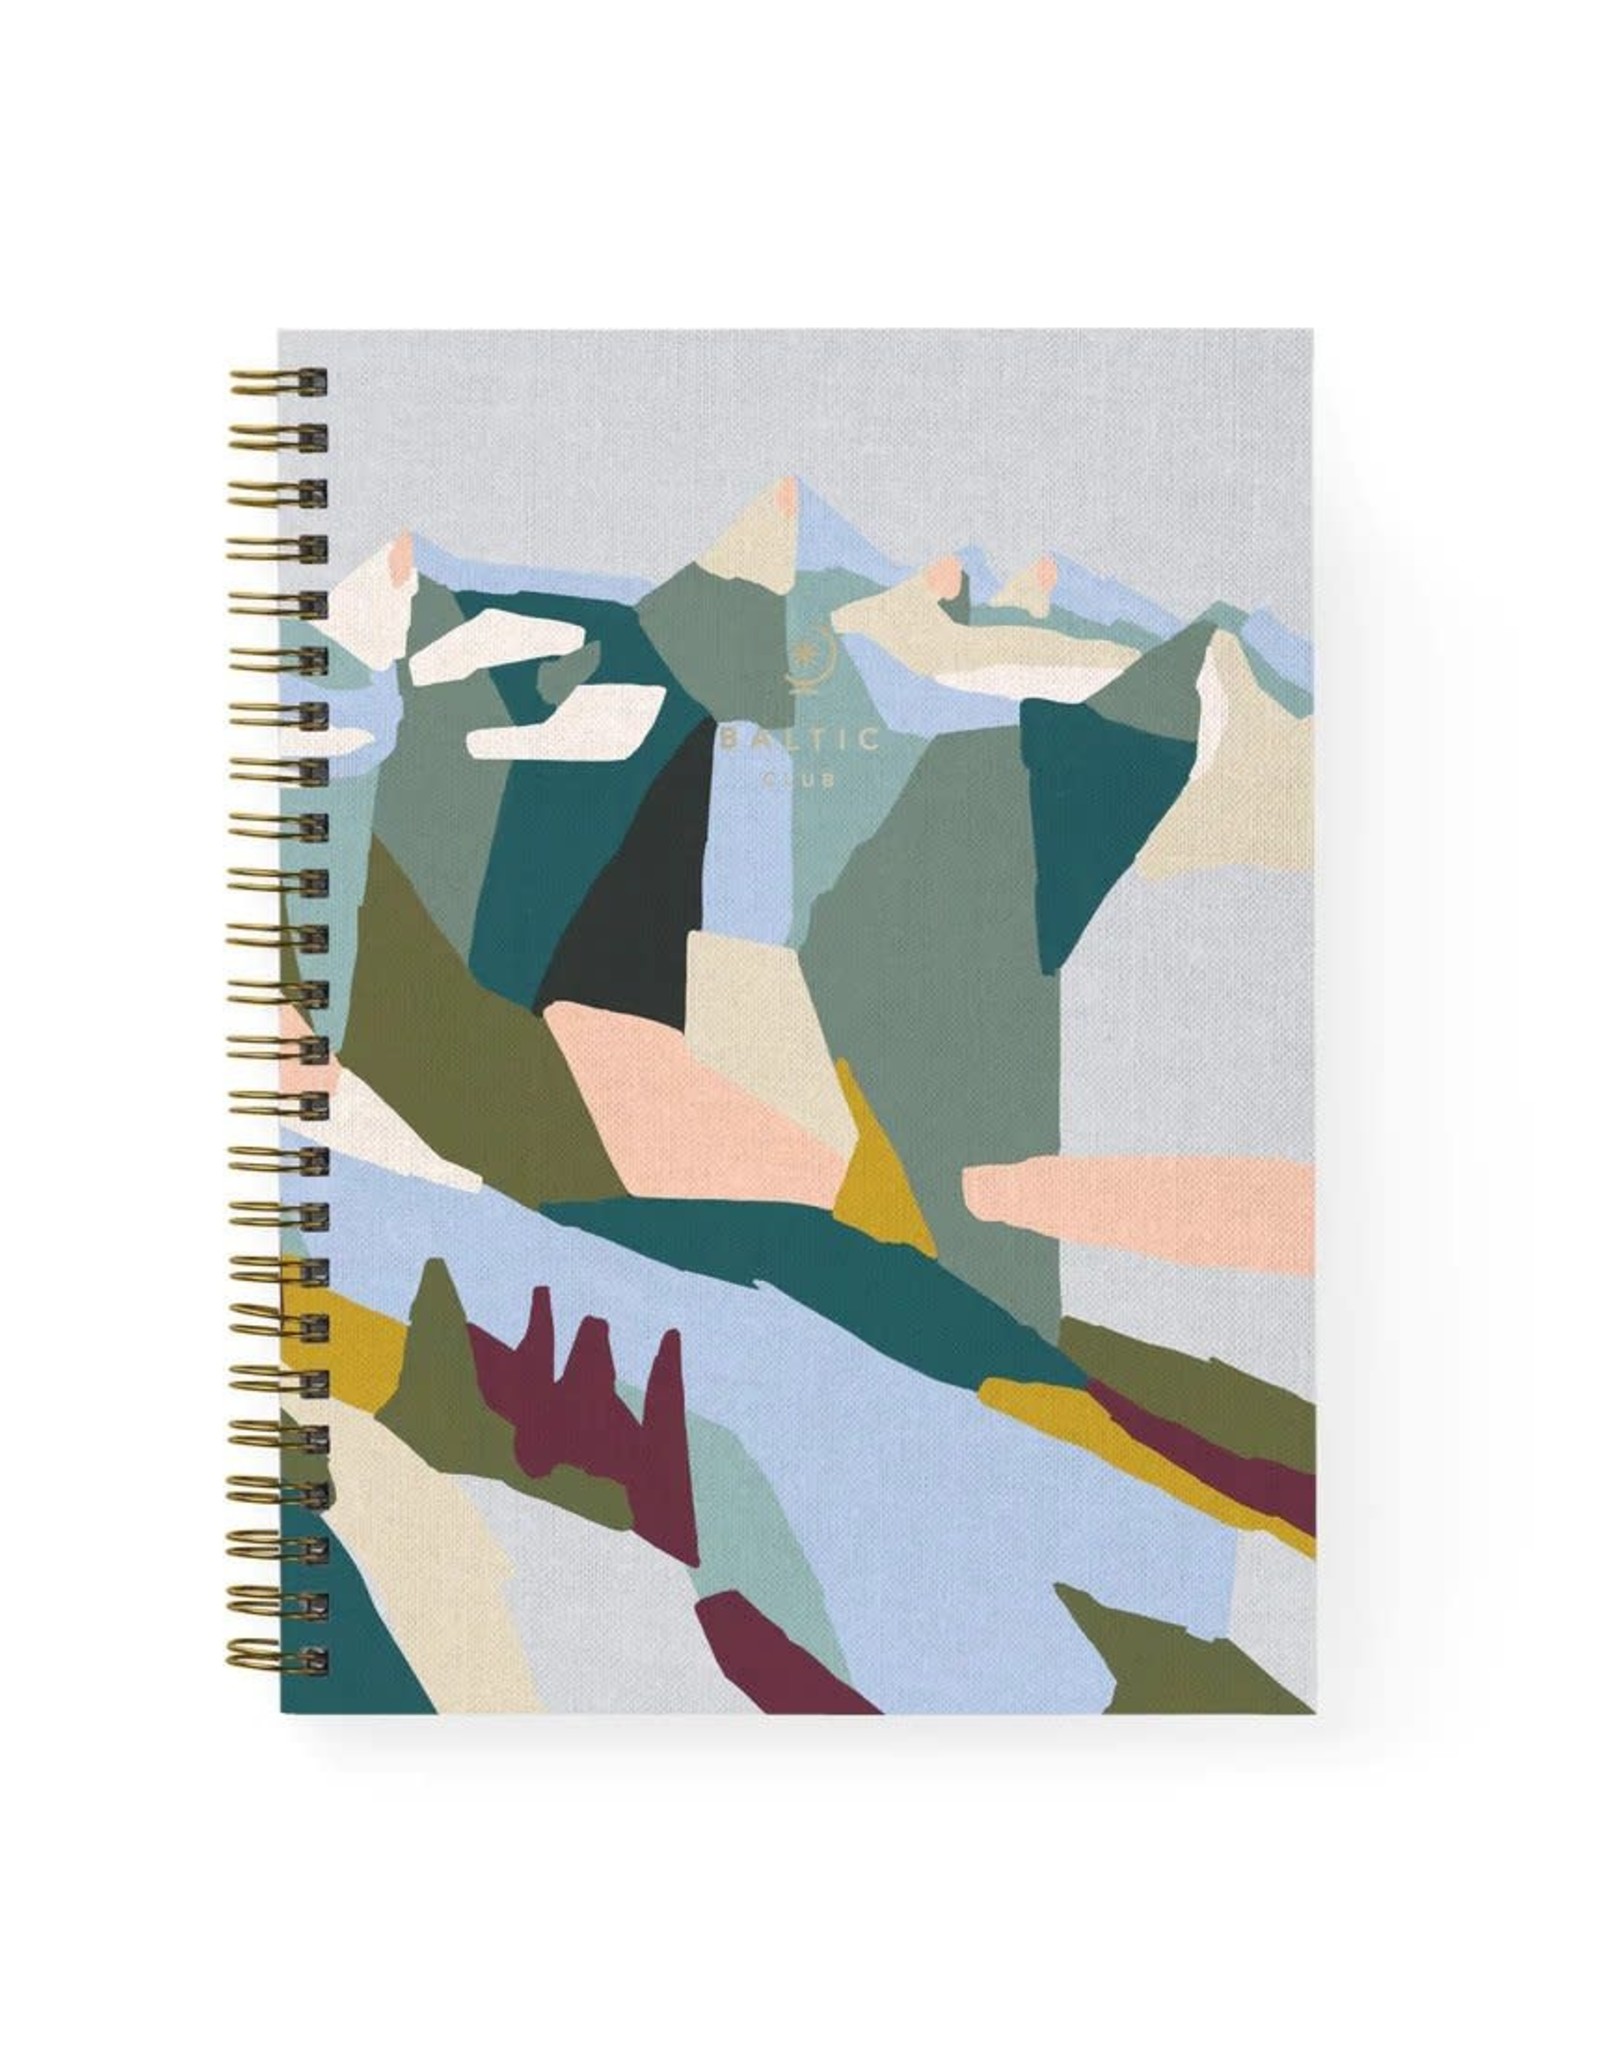 Baltic Club Pacific Slopes Spiral Notebook